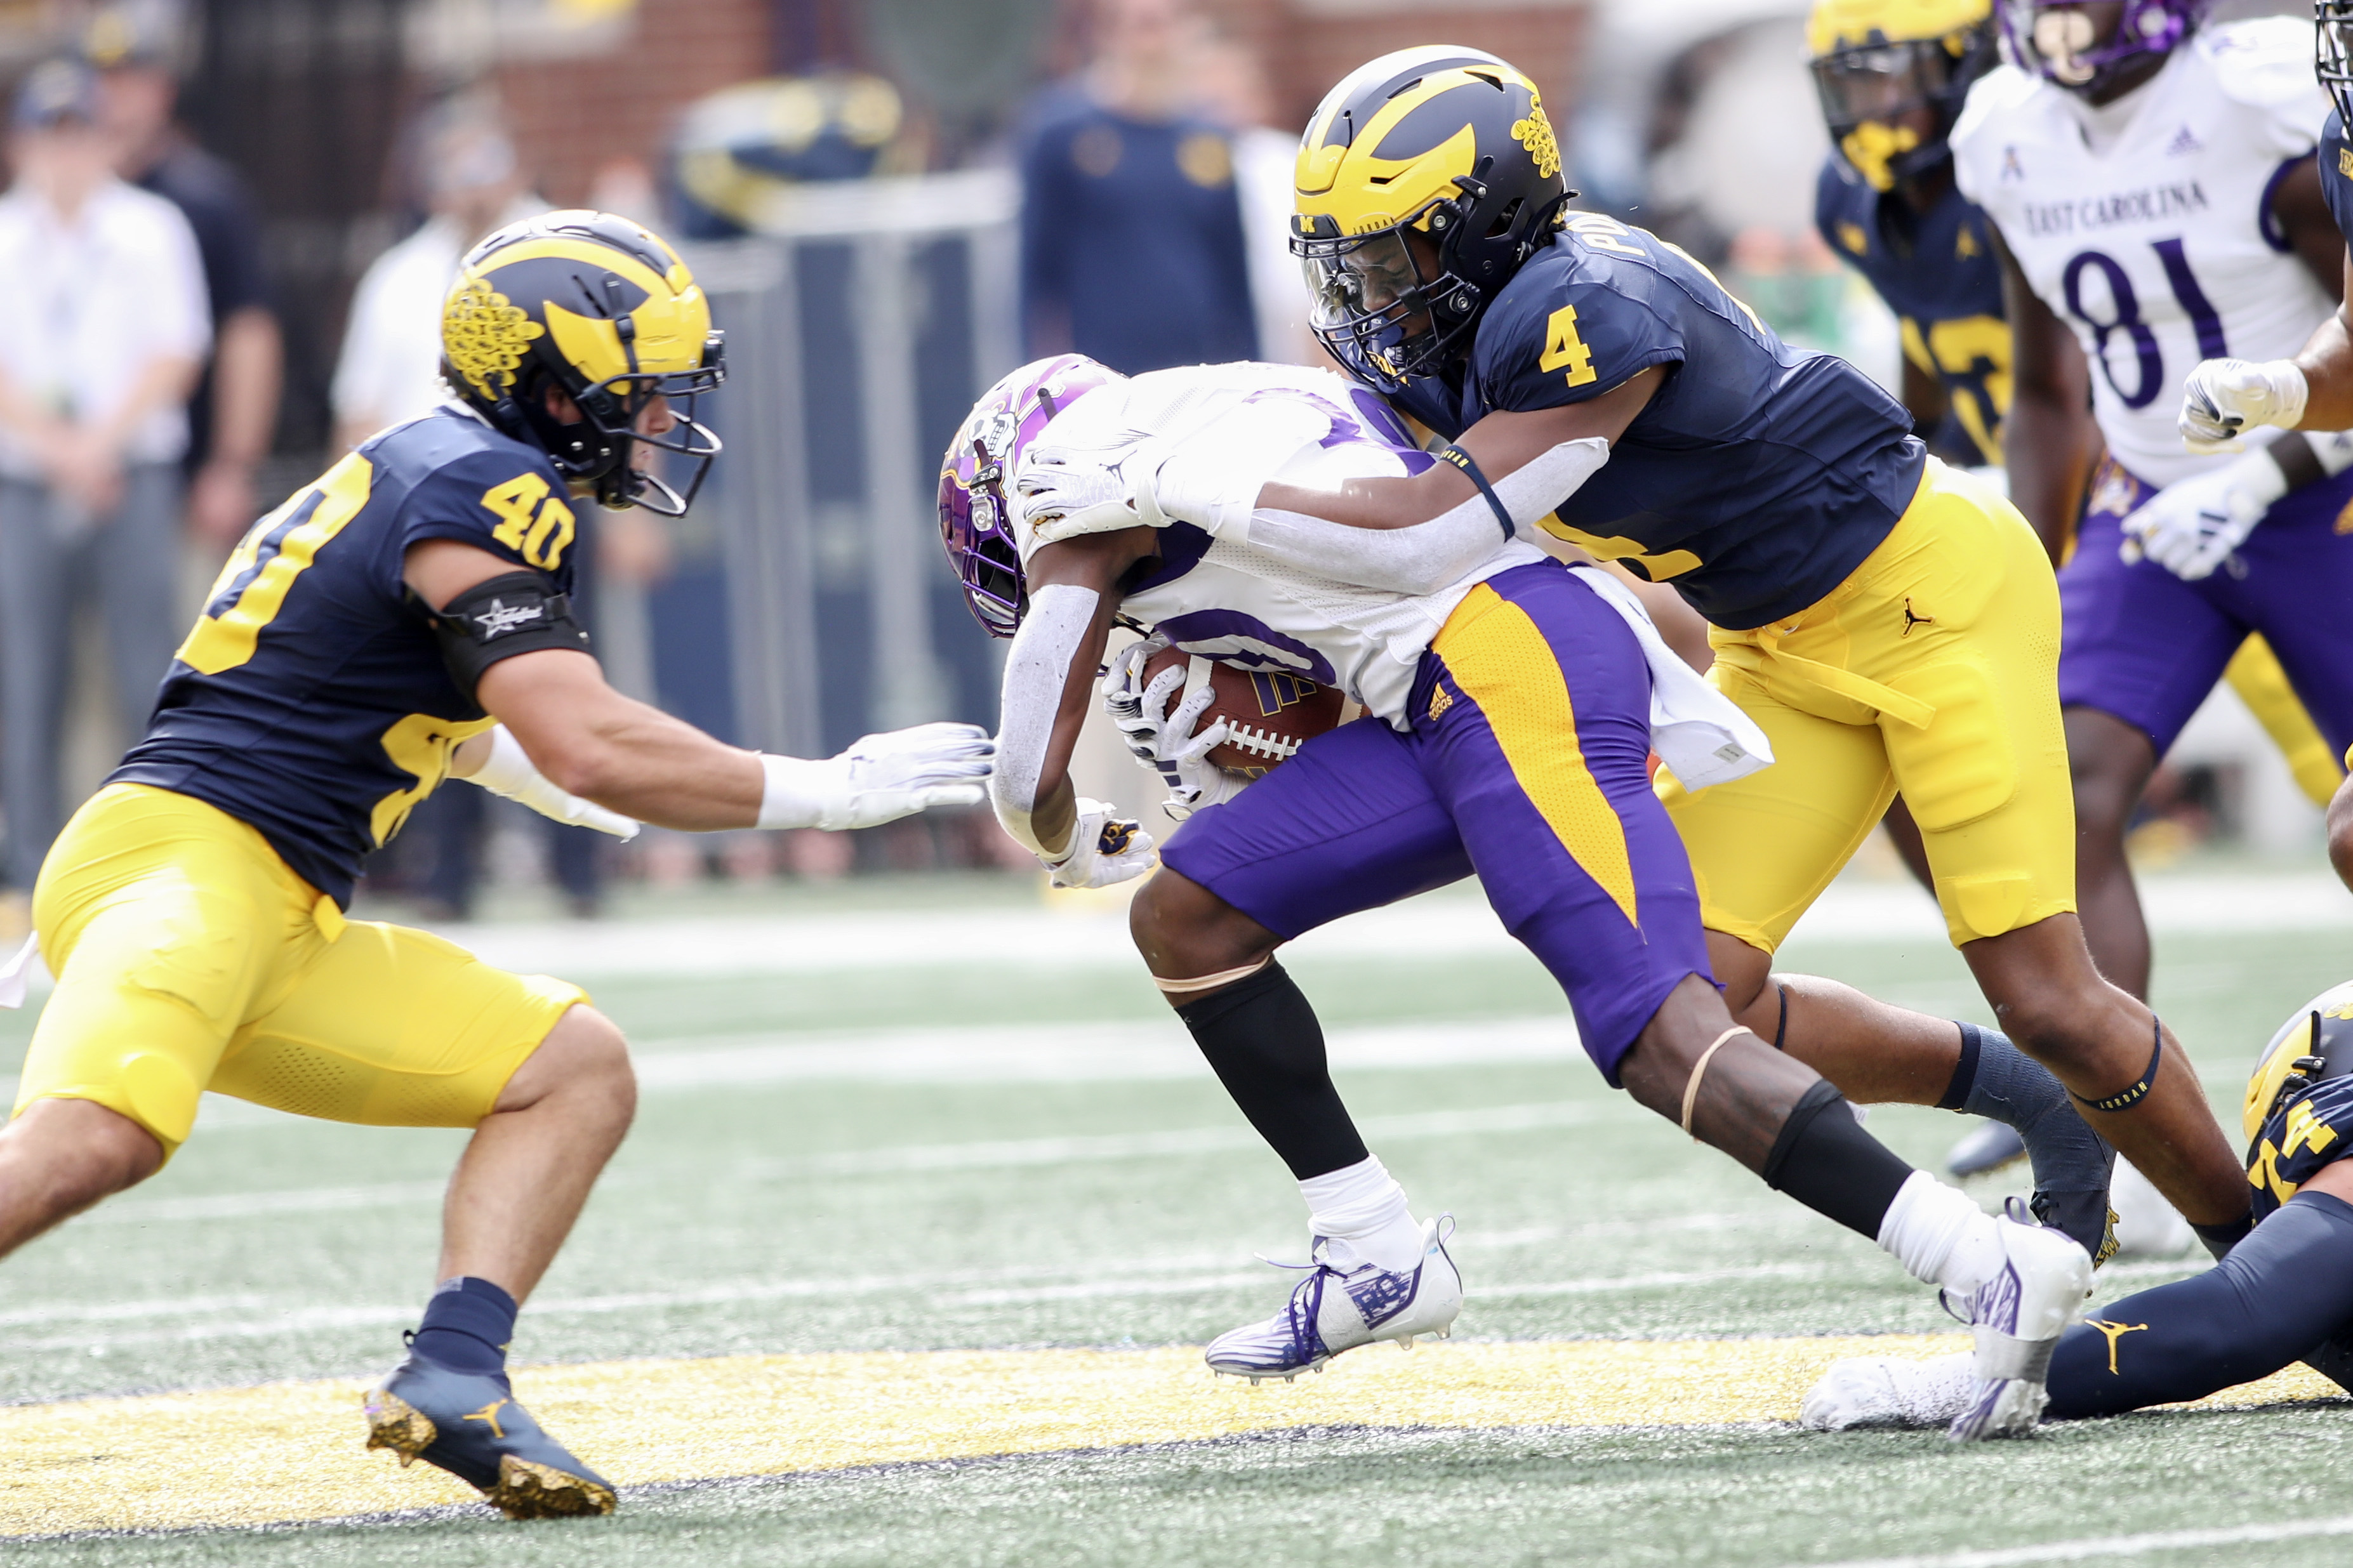 J.J. McCarthy leads No. 2 Michigan over East Carolina 30-3 without Jim  Harbaugh on the sideline